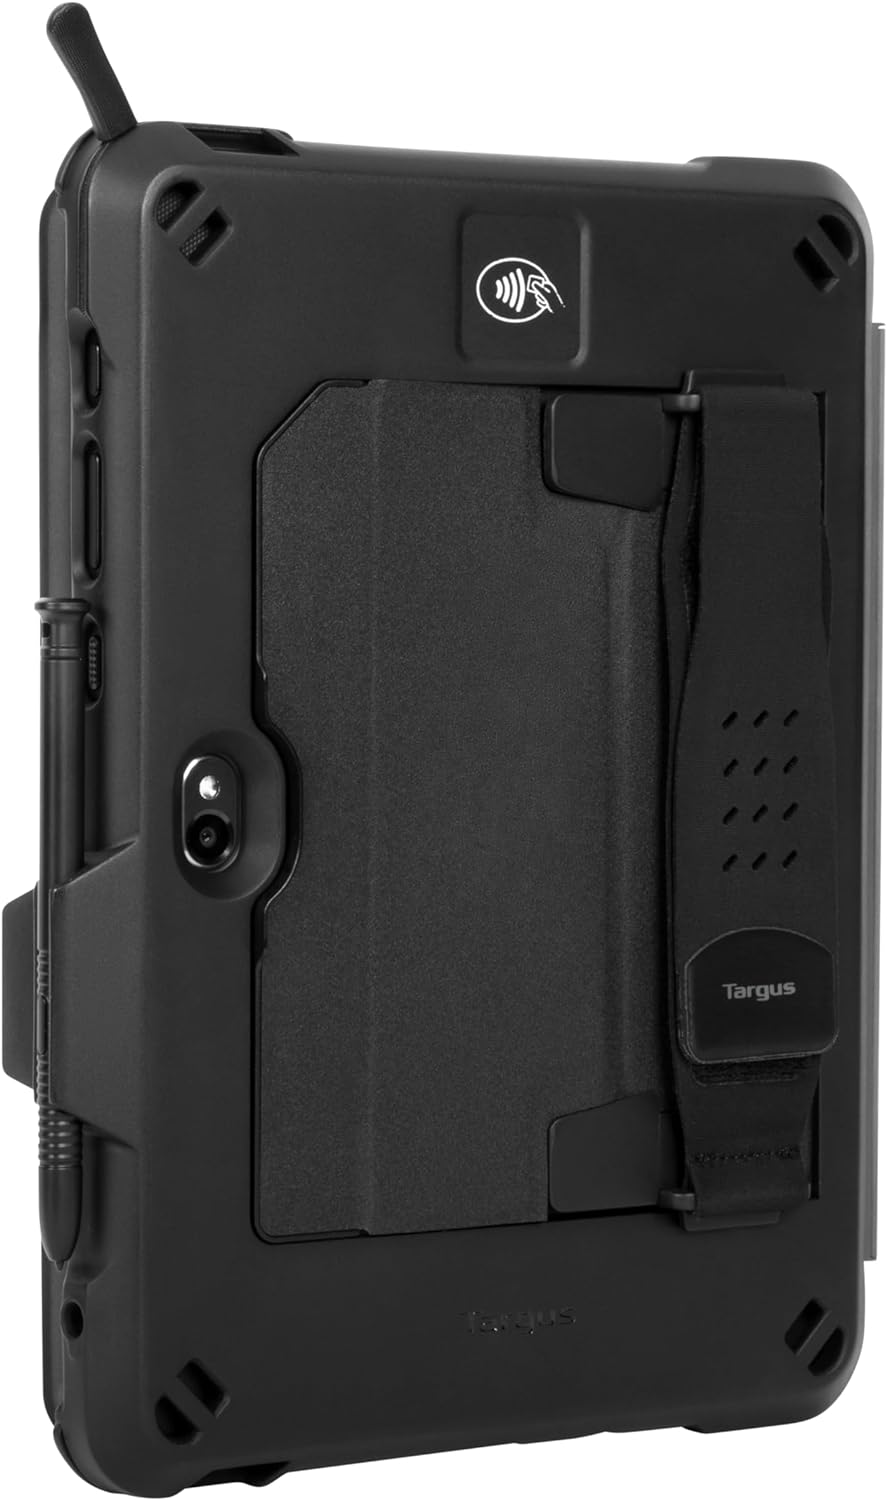 Samsung Tab Active4 Pro Field Ready Case, Protective Tablet Case, Rugged, Maximum Protection, Slim Design, Matte Finish, US Version, Black (GP-FPT636TGCBW)...Made by TARGUS